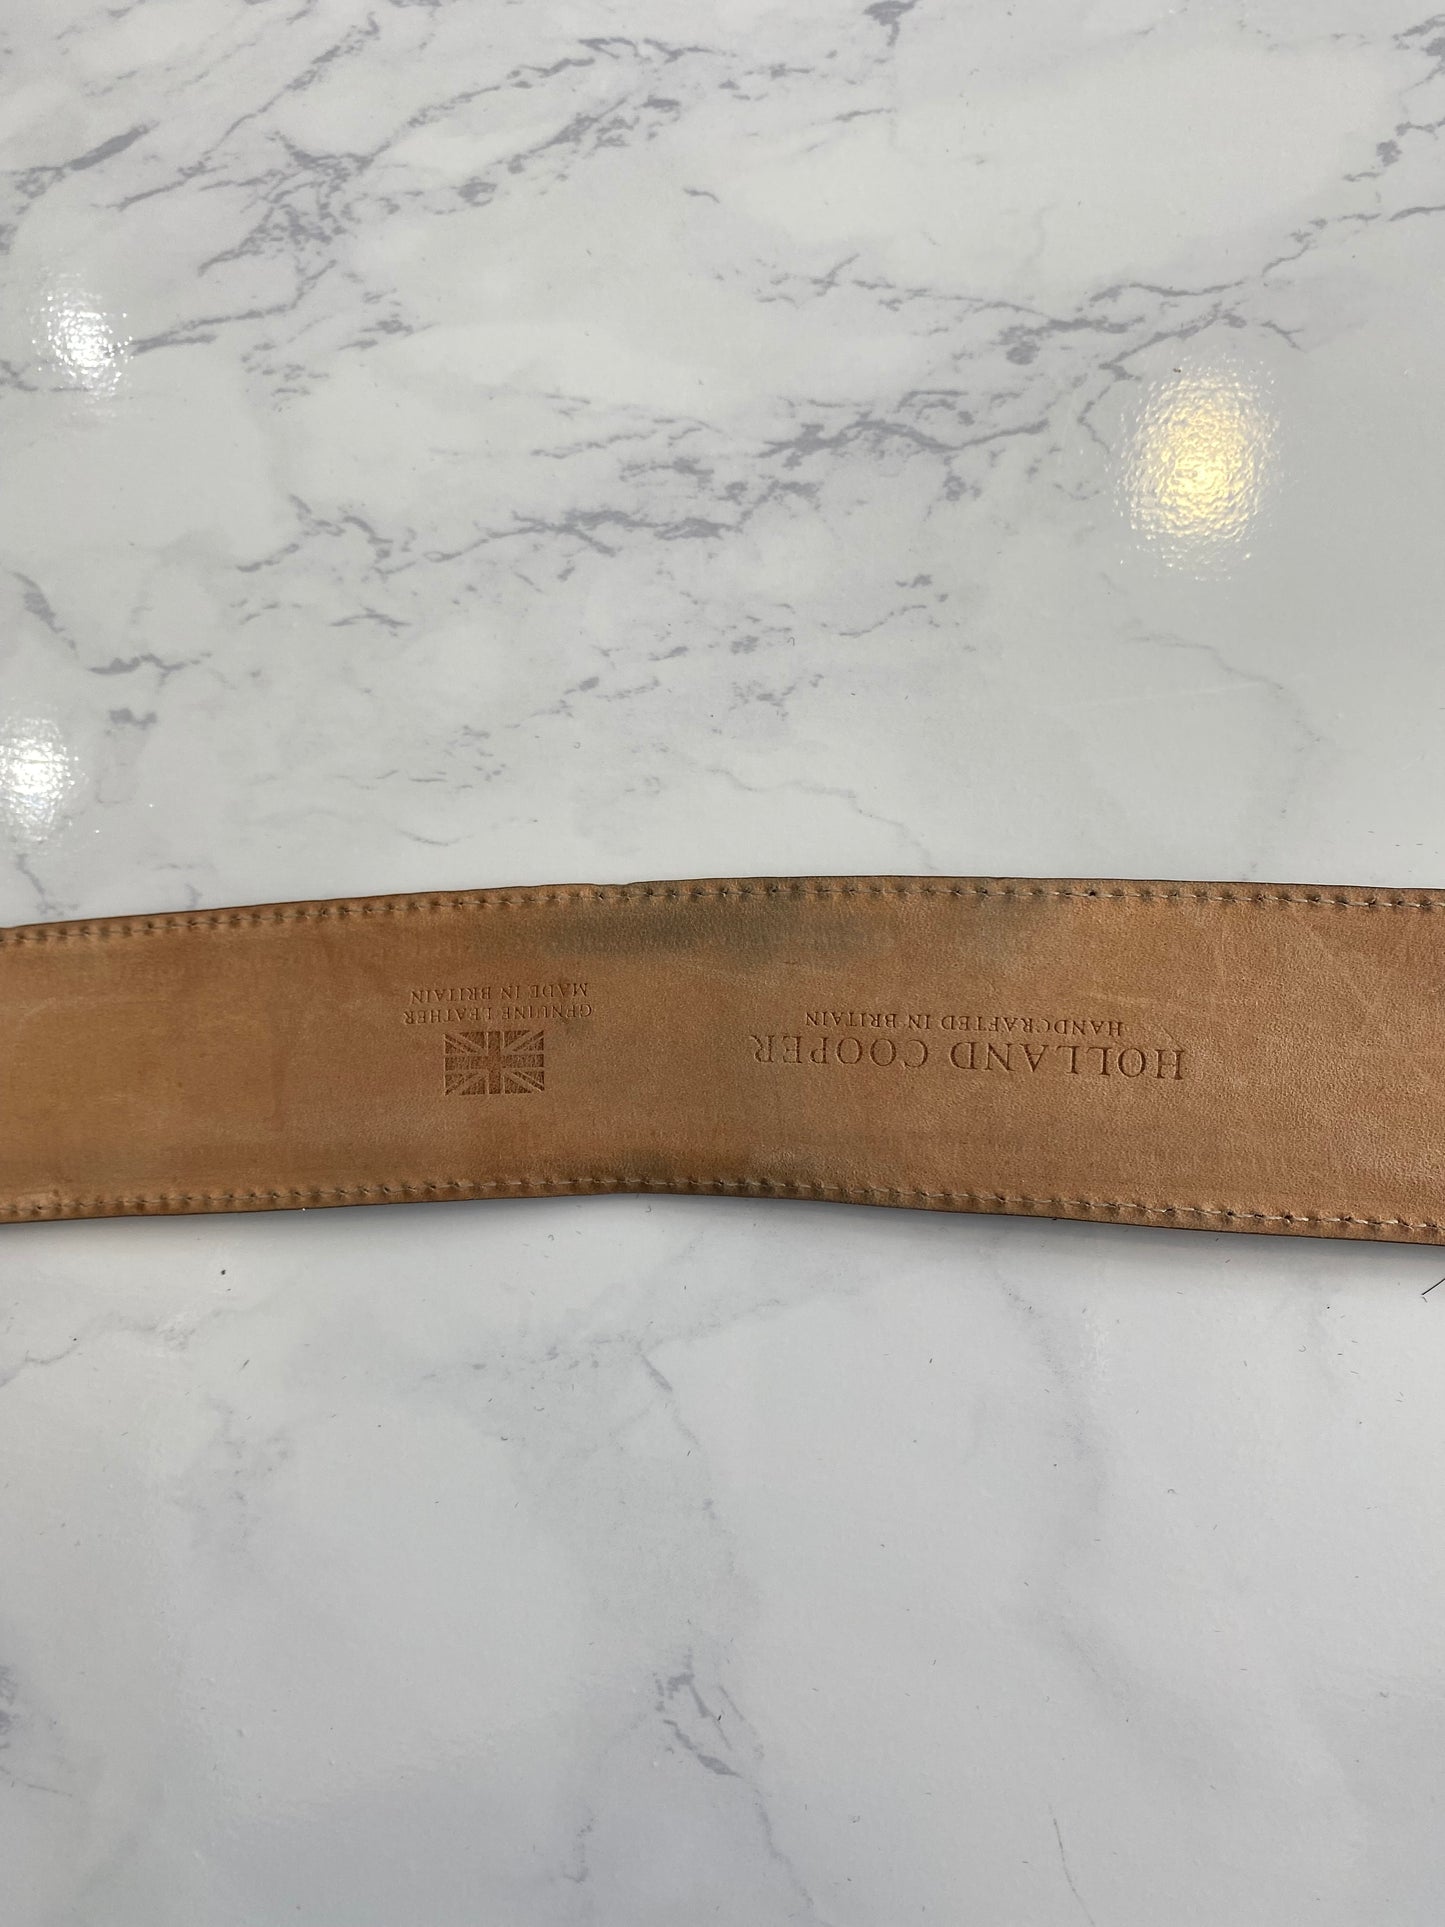 Holland Cooper Tan Croc Leather Belt with Box